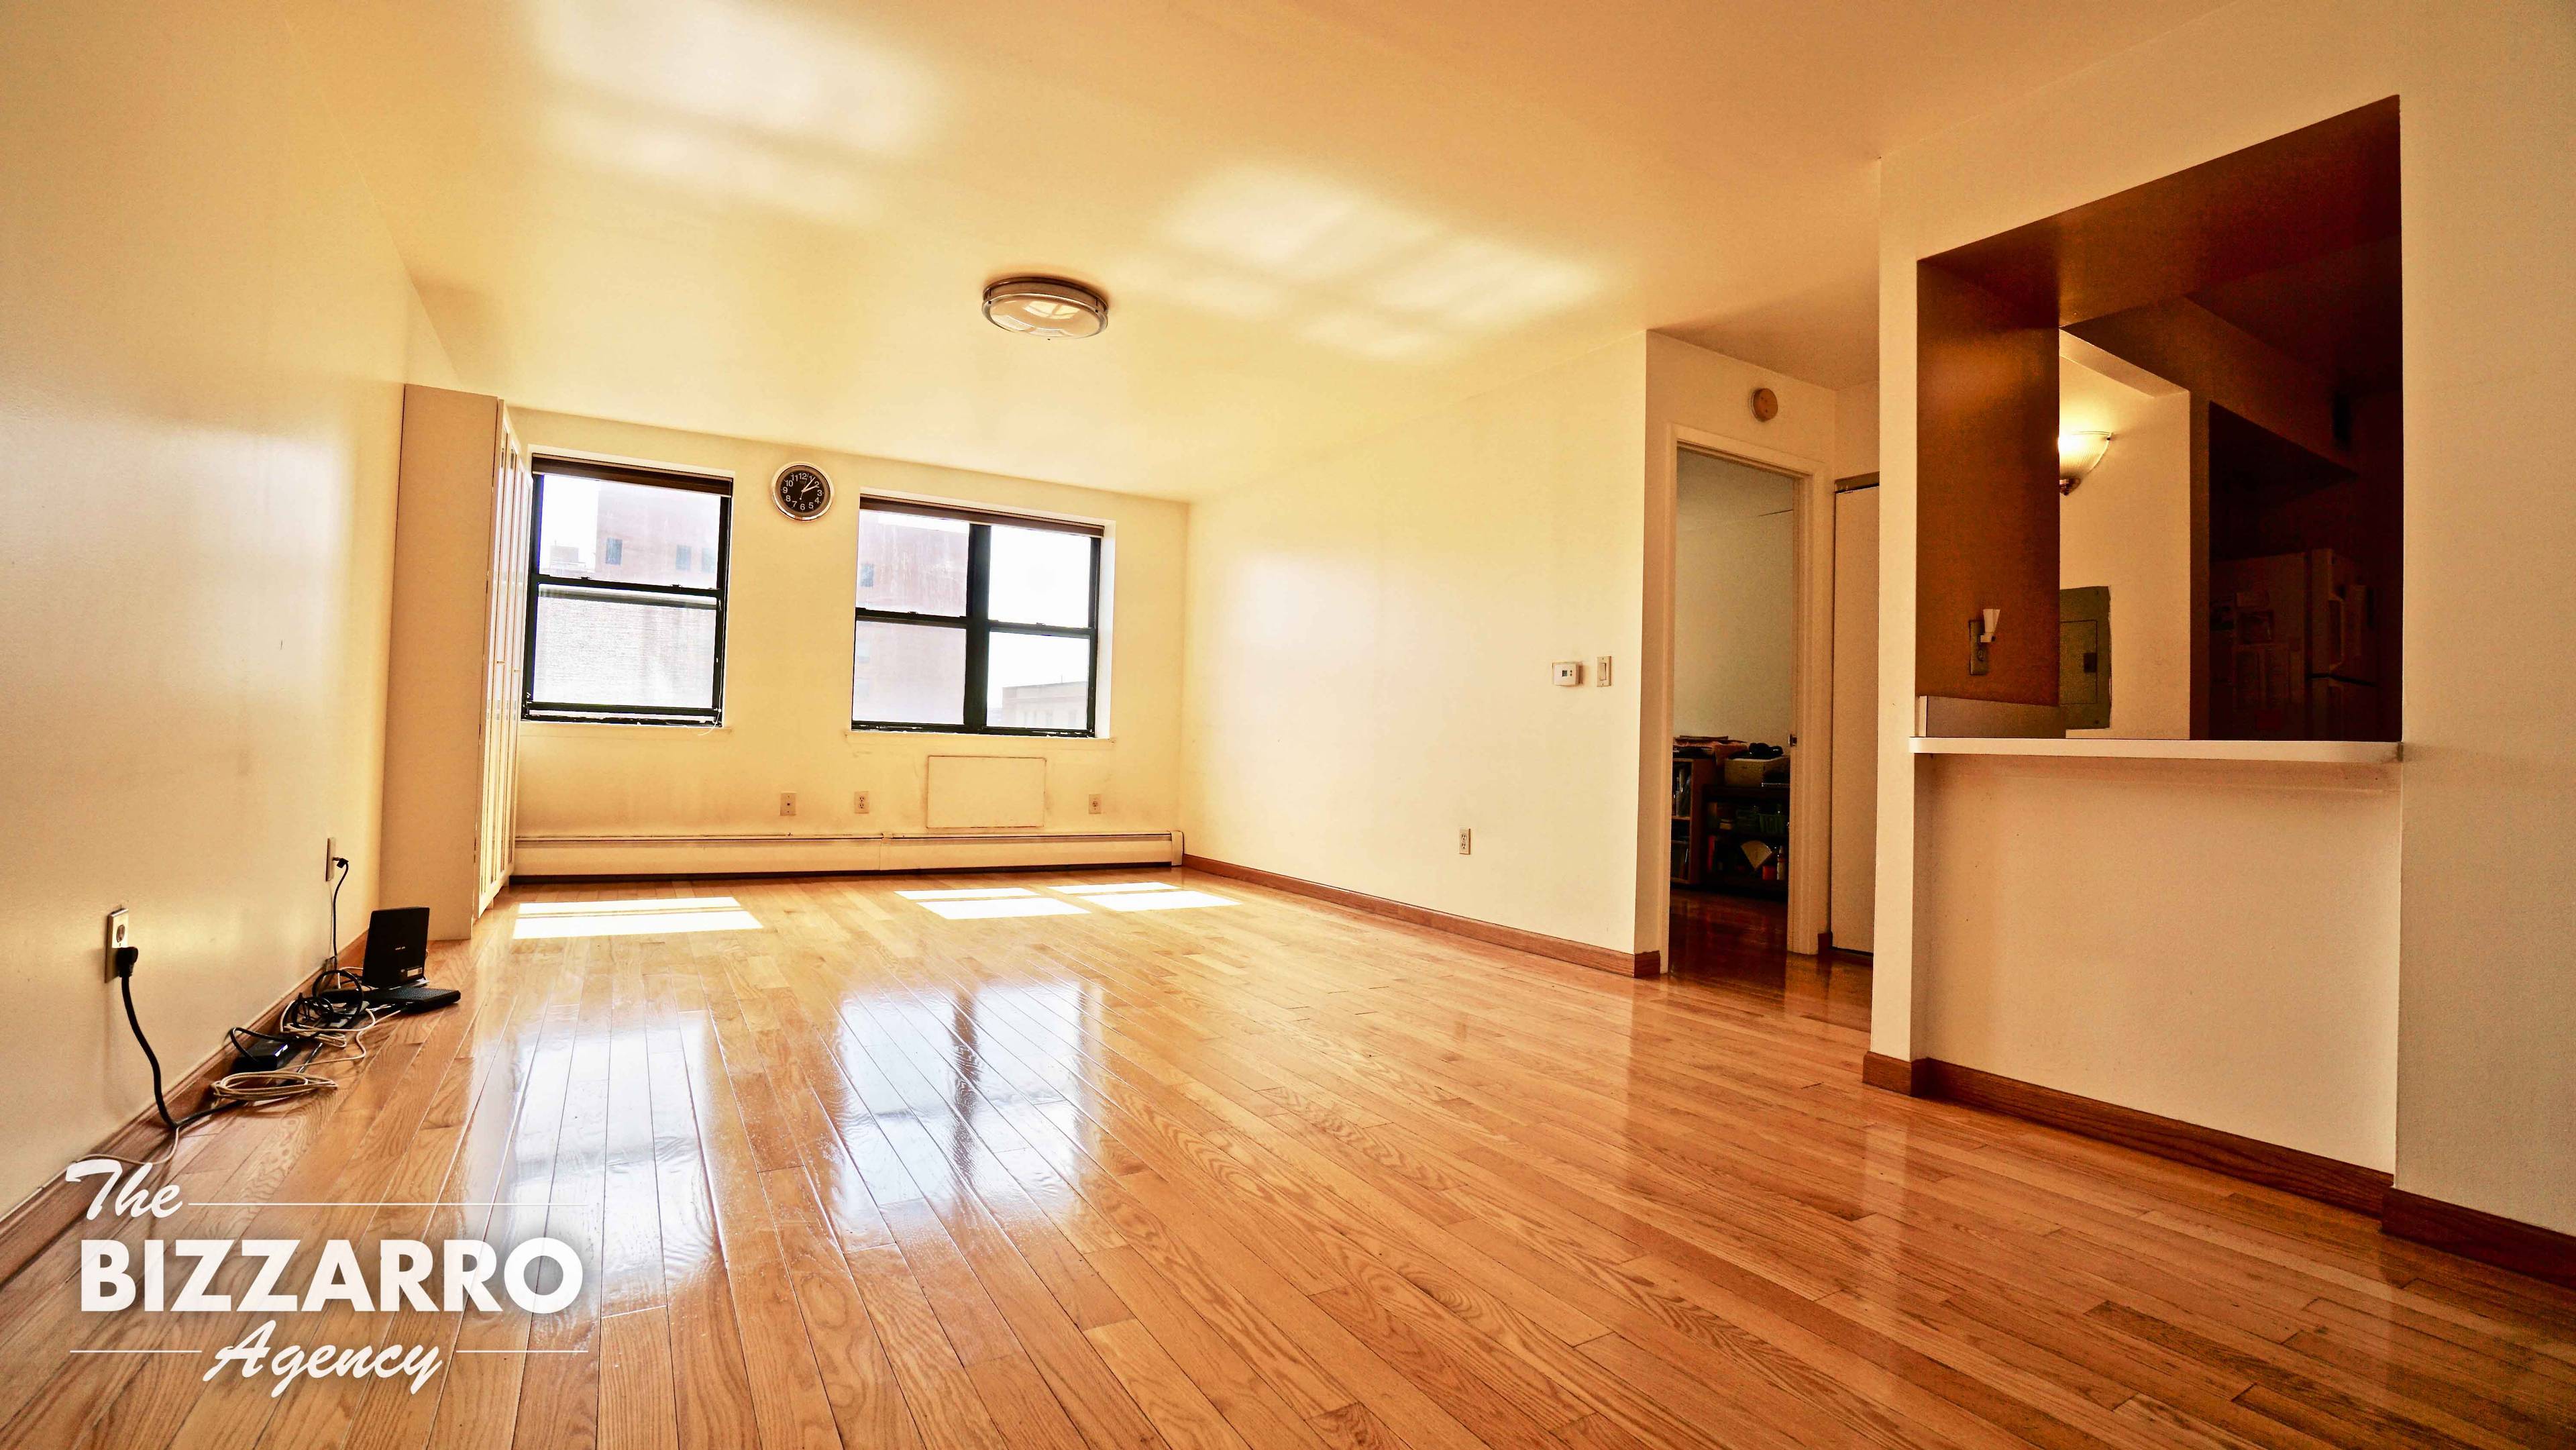 Sunlight abounds in this southern facing split unit 2 bedroom apartment in the middle of bustling Harlem.